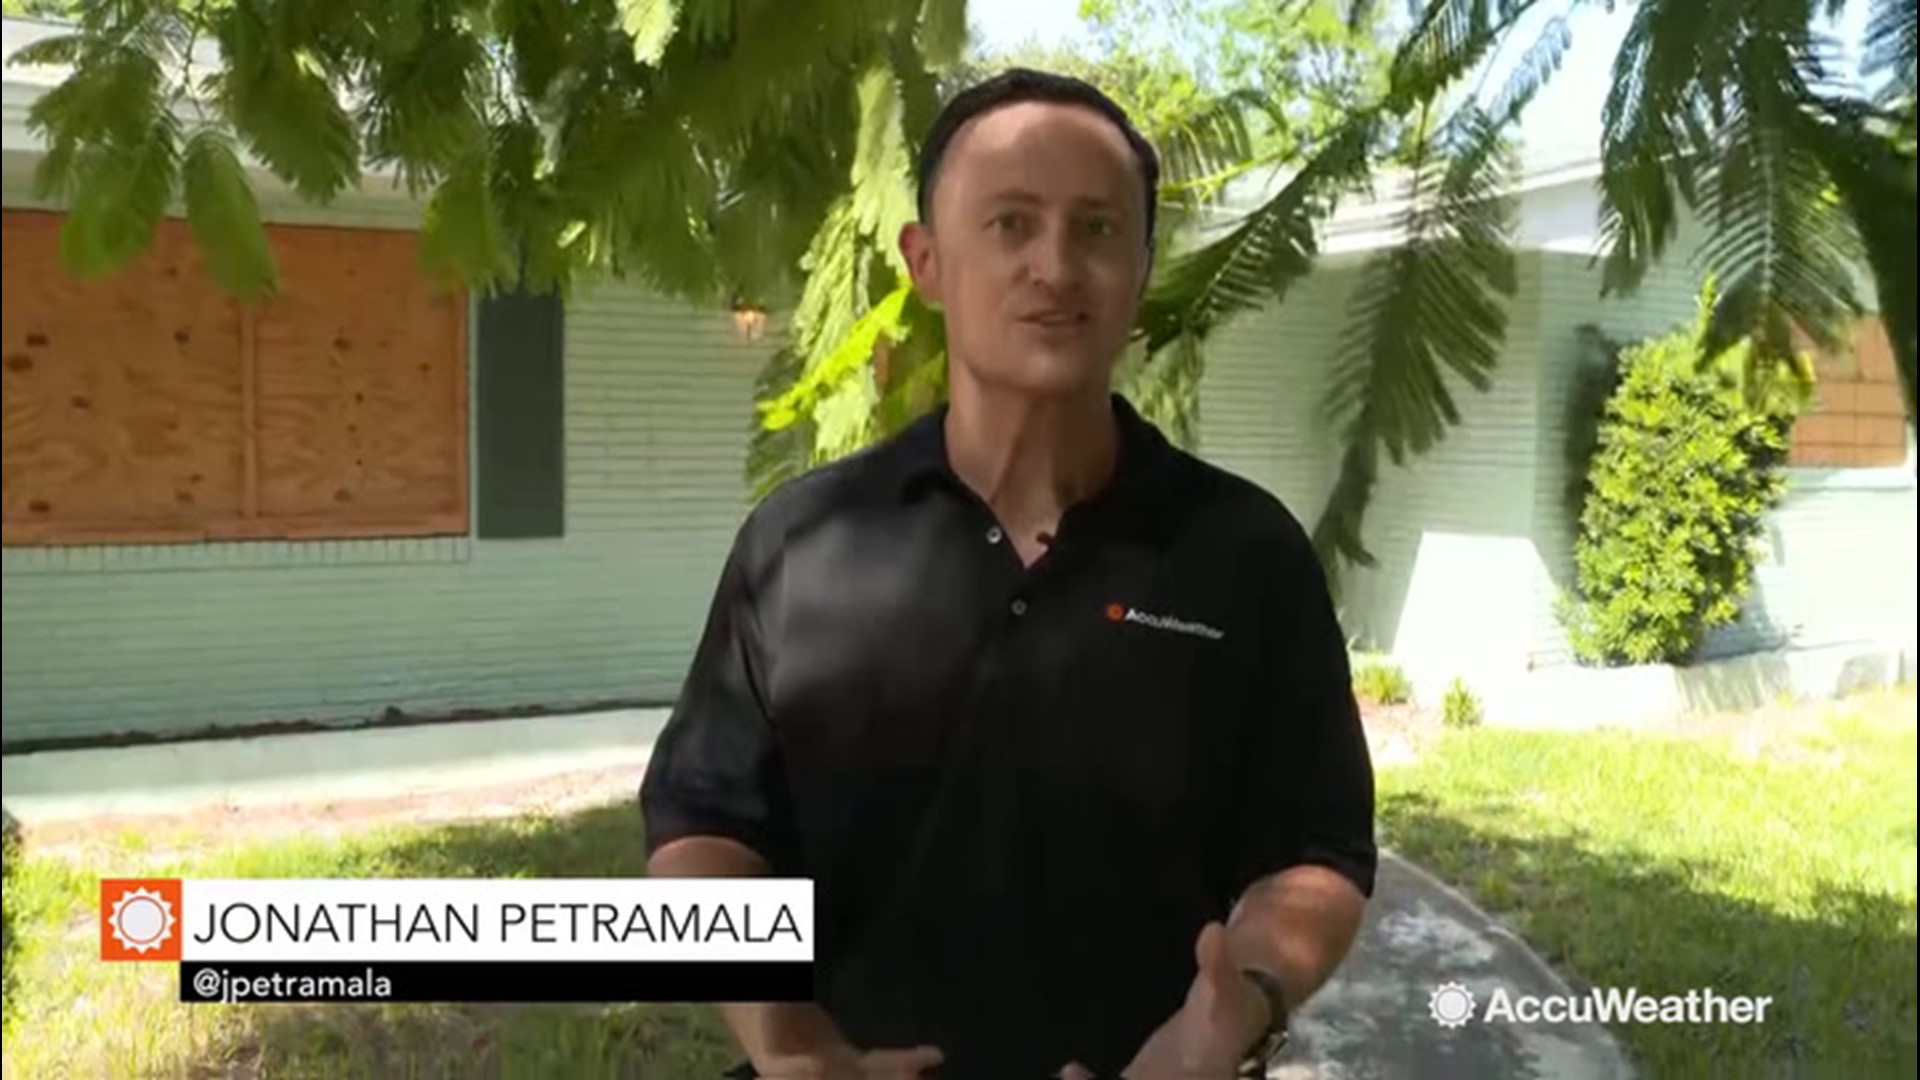 In Melbourne Beach, Florida, it's better safe than sorry as people are ready to believe that Hurricane Dorian is going to stay off the coast. We have Jonathan Petramala here to elaborate on Sept. 1.